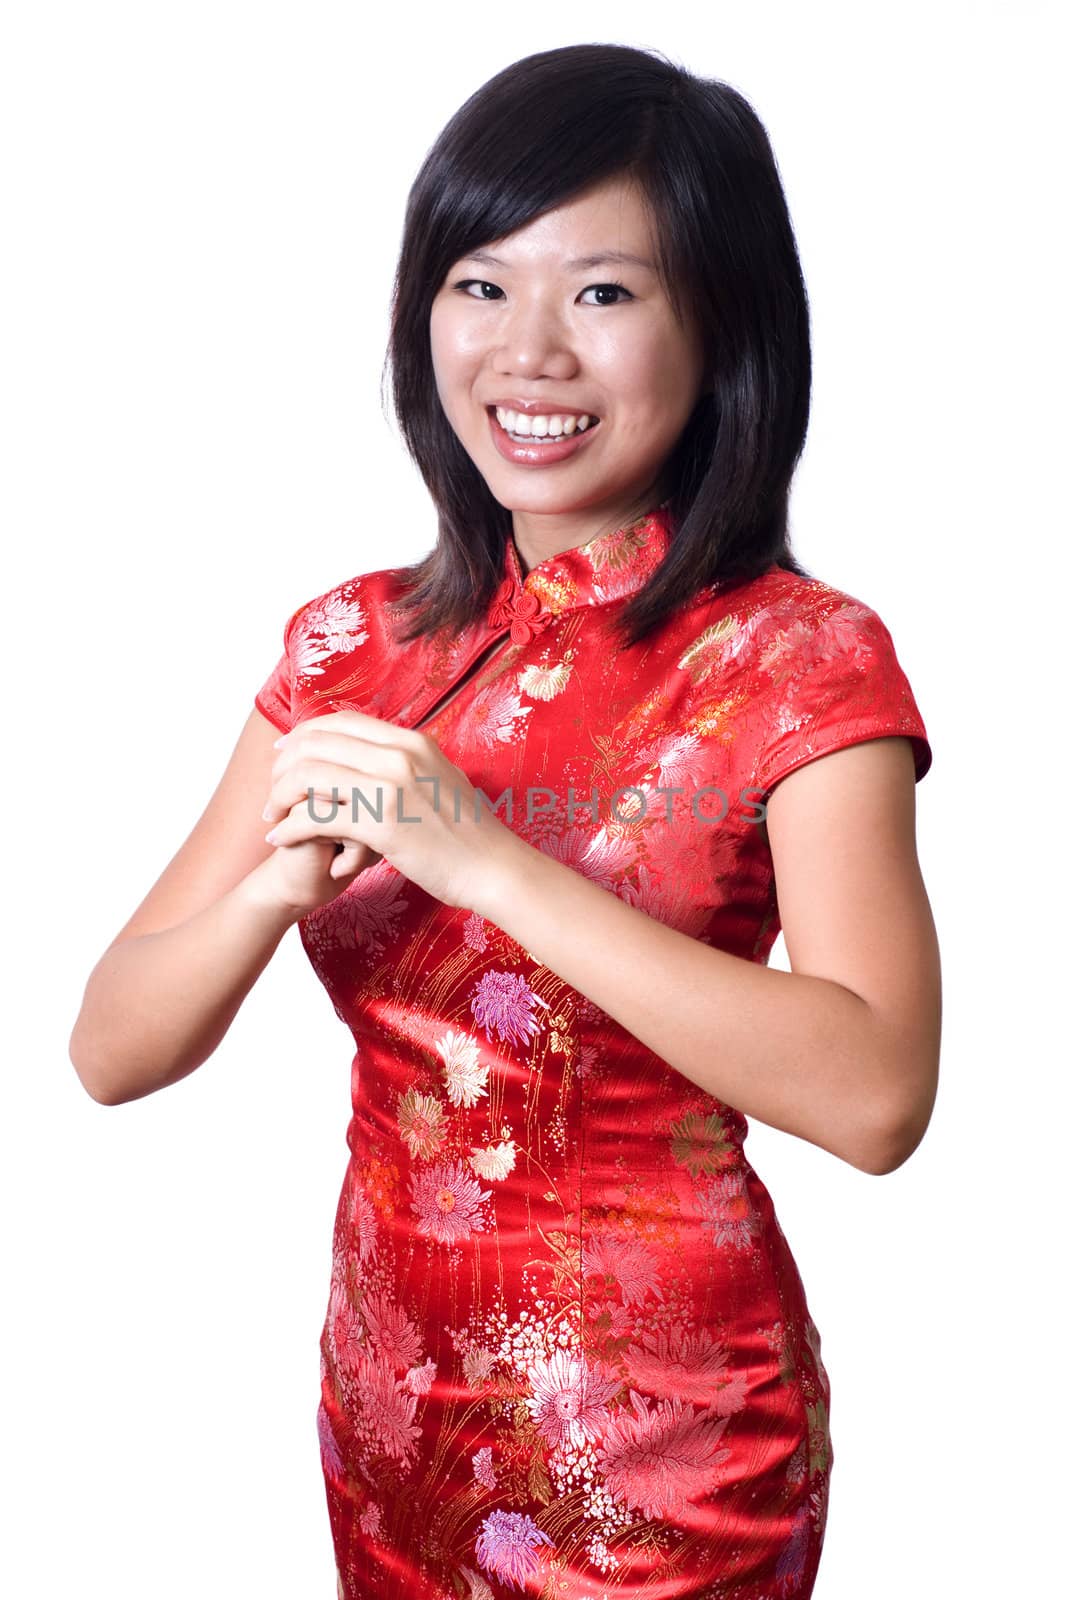 Oriental girl wishing you a happy Chinese New Year.